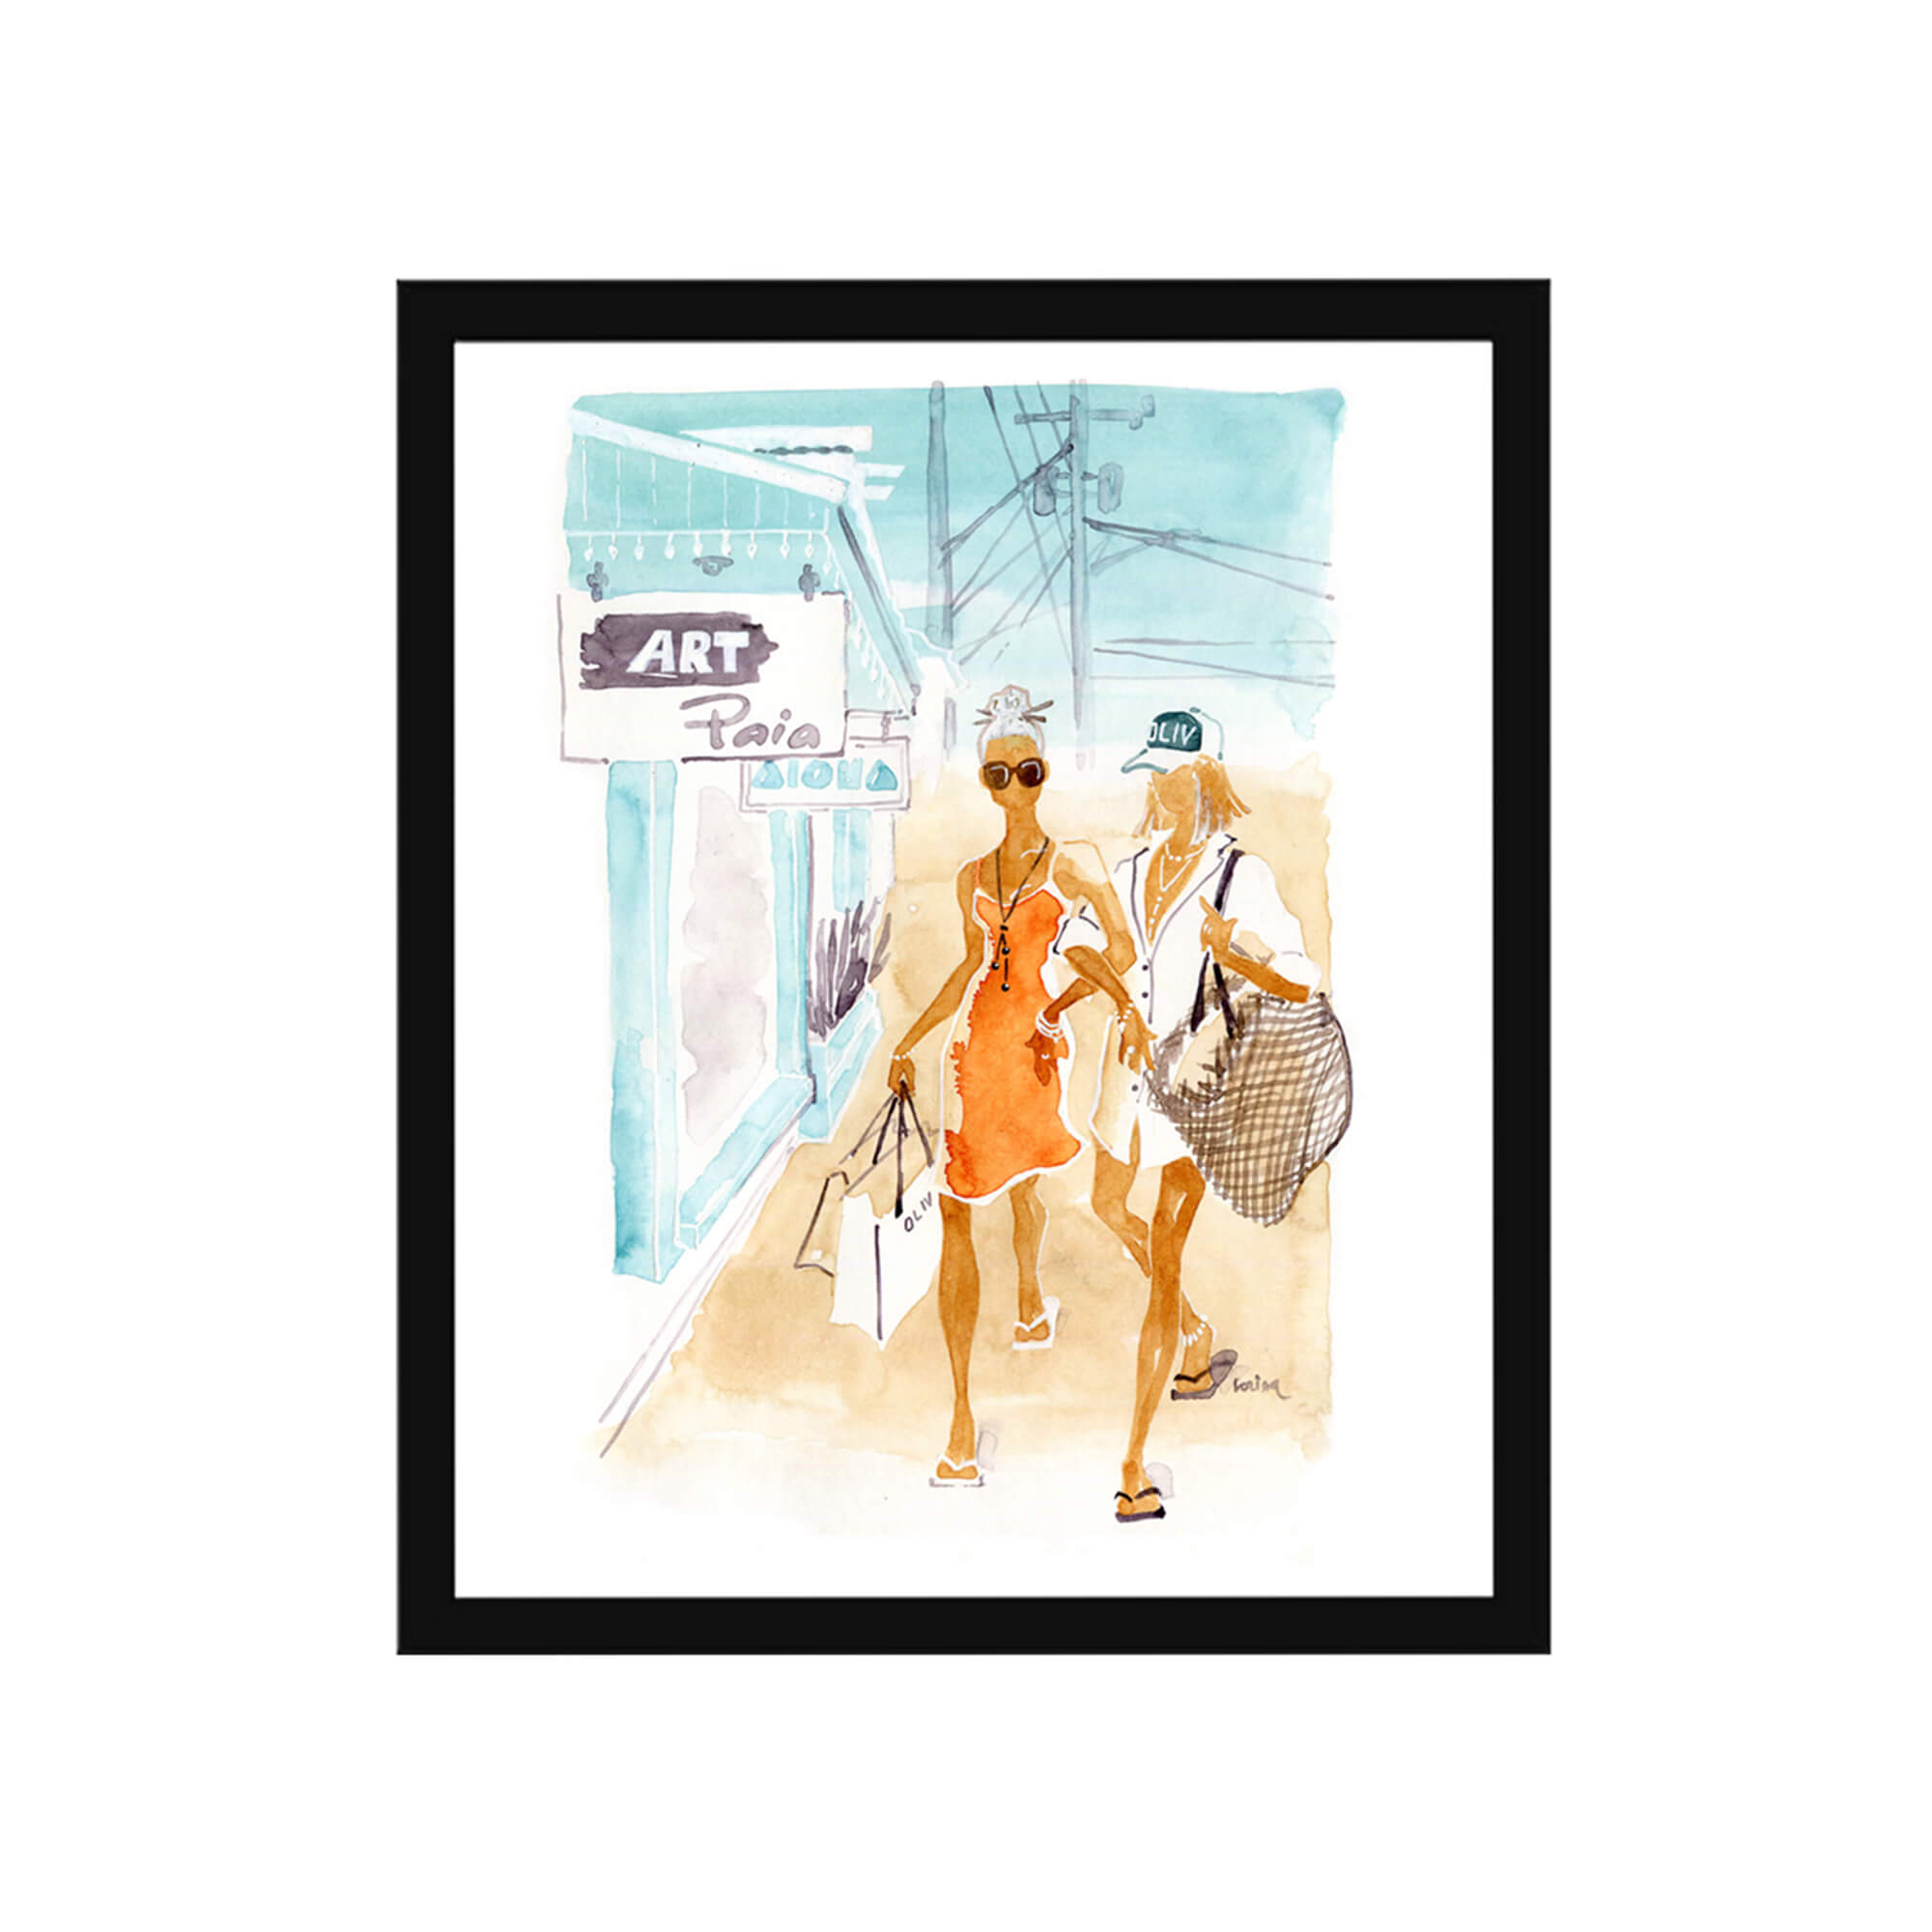 Framed paper giclée print of a watercolor artwork featuring two fashionable women walking along the street by Hawaii artist Lovisa Oliv